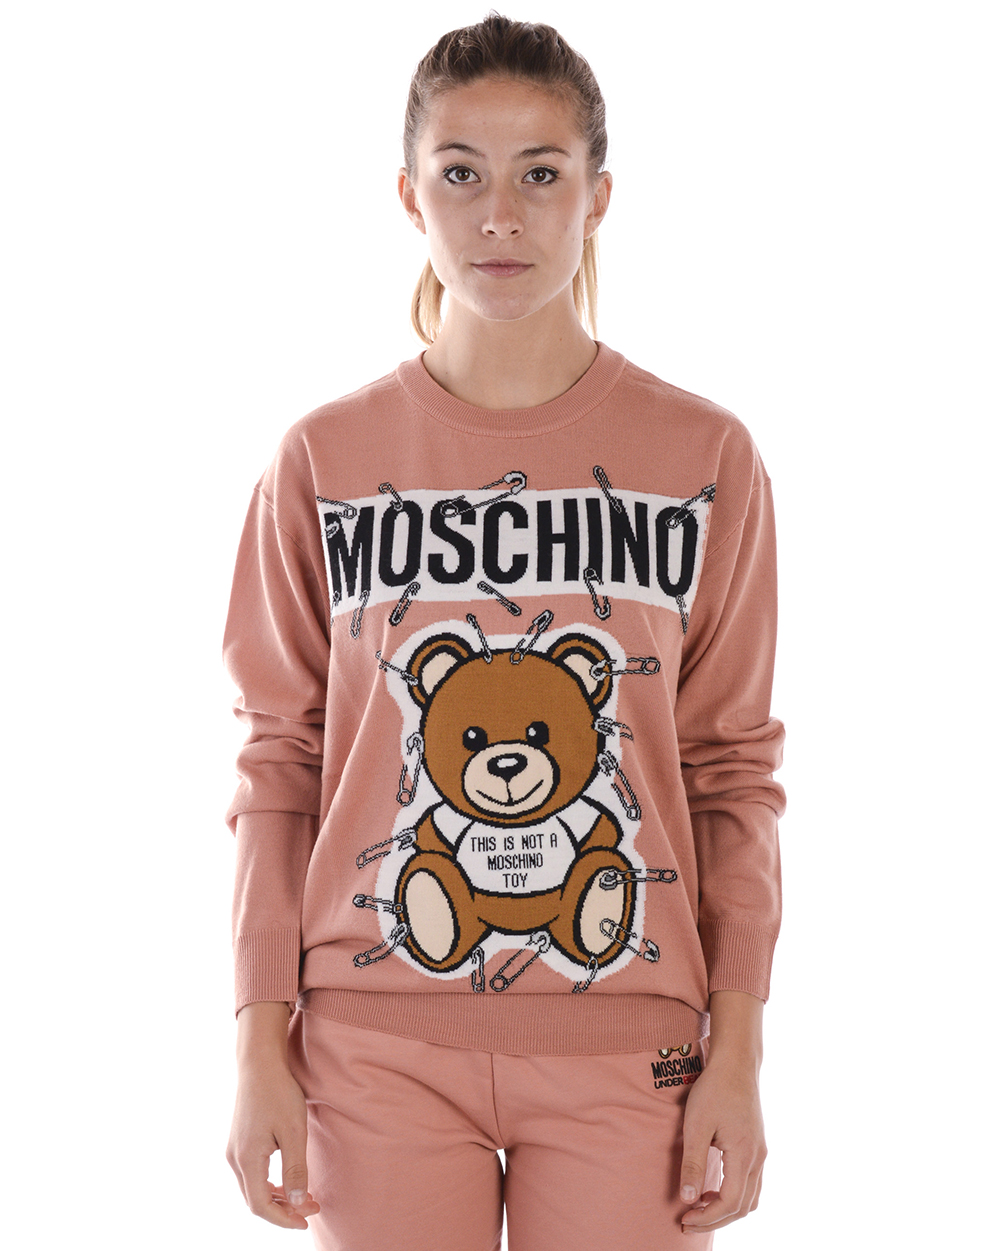 Tricot Moschino Sweater MADE IN ITALY 